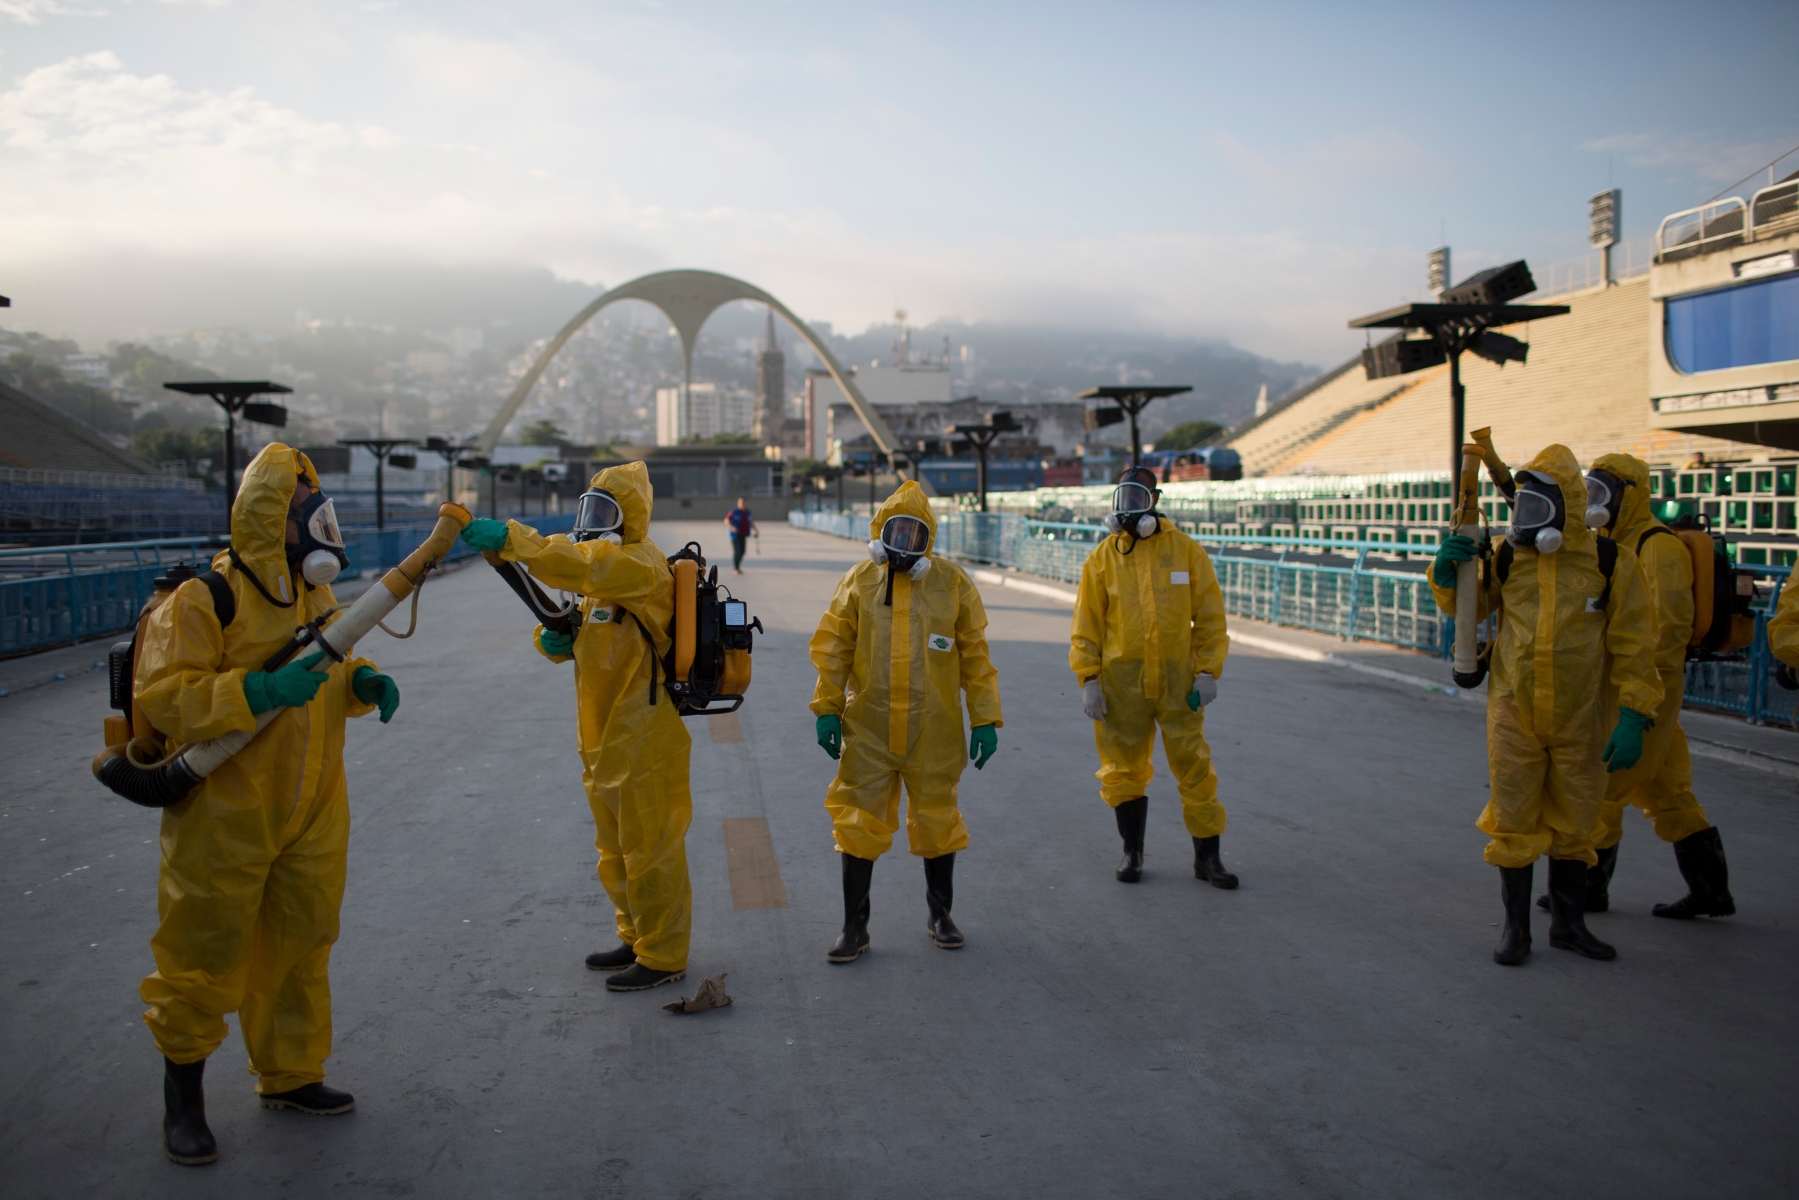 FILE - This is a  Tuesday, Jan. 26, 2016  file photo of health workers as they get ready to spray insecticide to combat the Aedes aegypti mosquitoes that transmits the Zika virus under the bleachers of the Sambadrome in Rio de Janeiro,  which will be used for the Archery competition in the 2016 summer games. With the opening ceremony just over two months away, Olympic leaders have plenty of challenges to discuss this week when they meet for the last time before gathering in Rio de Janeiro on the eve of South AmericaÌs first games. (AP Photo/Leo Correa, File) Brazil Olympics IOC Meeting